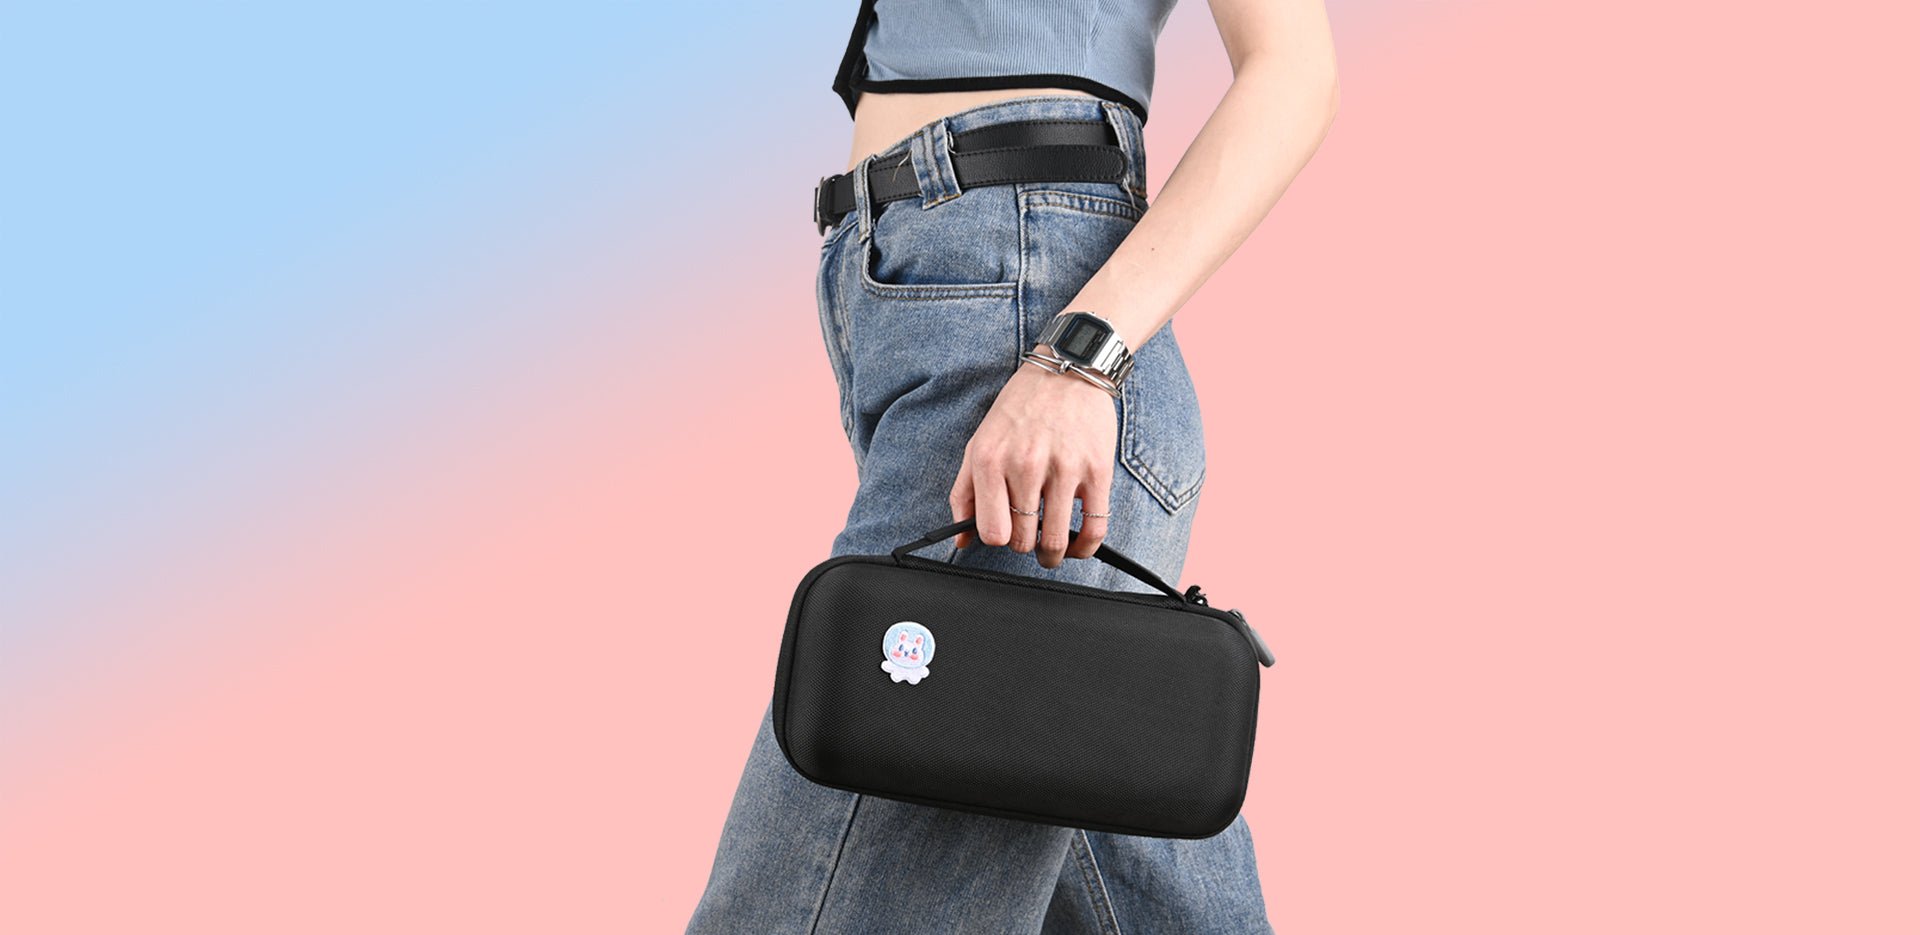 Why do you need an Younik carrying case for your Switch?